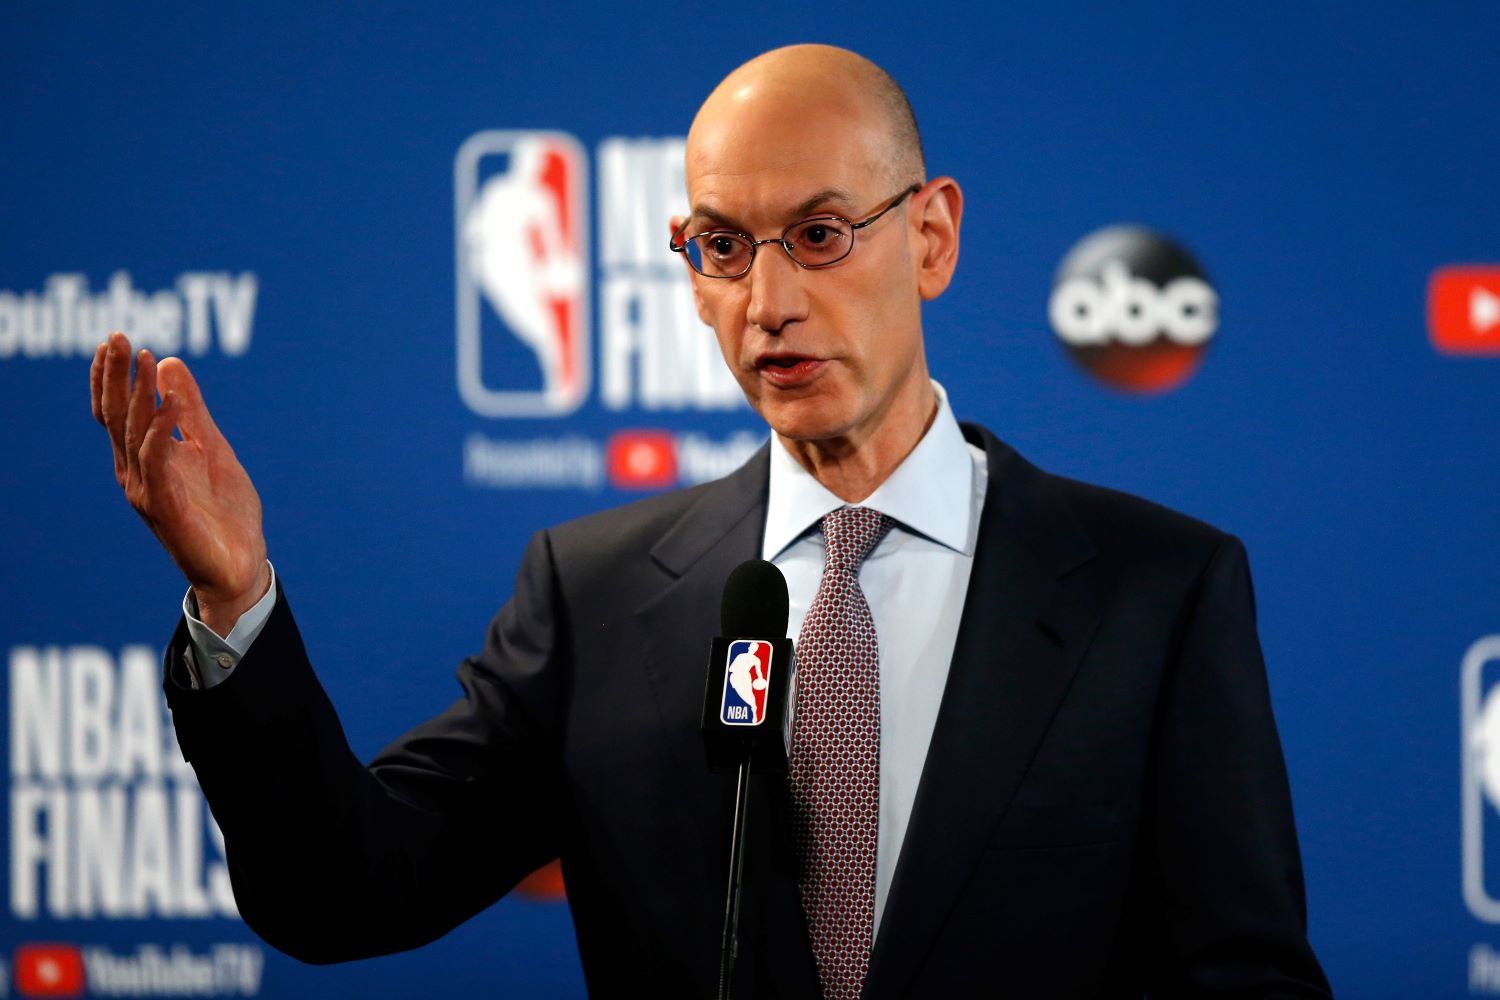 The NBA is saying goodbye to its random marijuana testing policy for the 2020-21 season. Did the league make the right call?